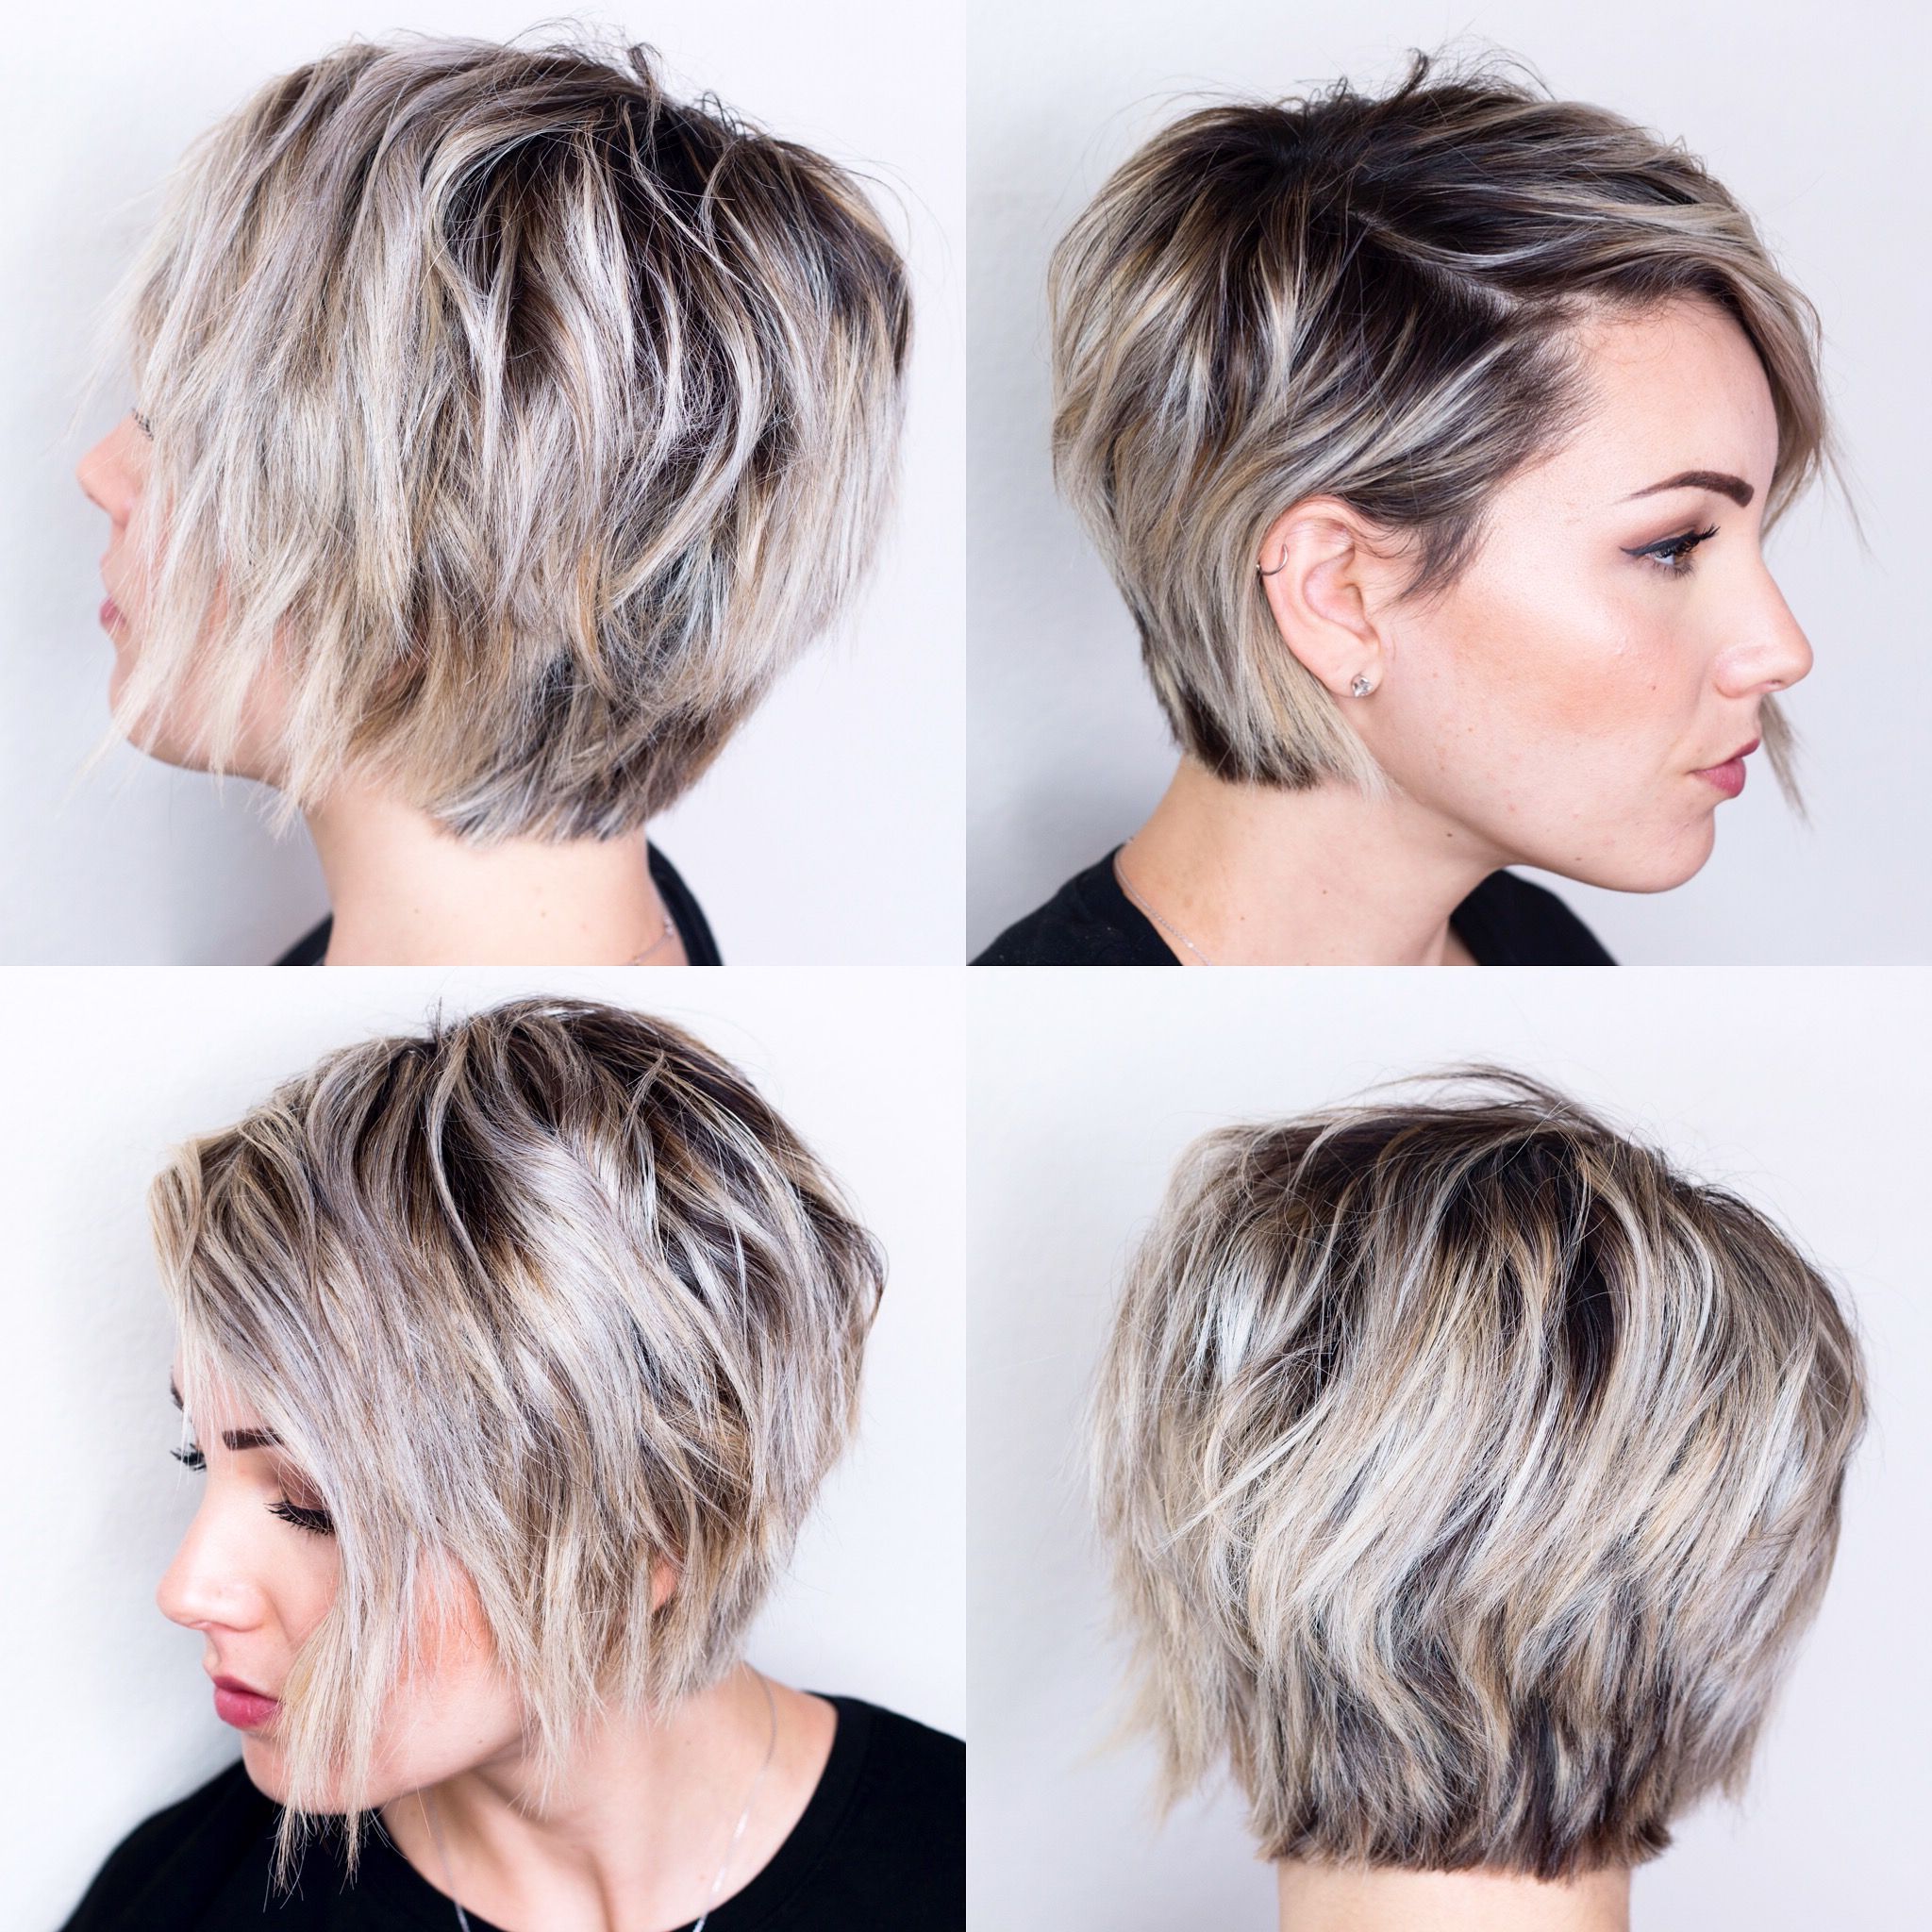 360 View Of Short Hair | H A I R In 2018 | Pinterest | Short Hair Inside Short Hairstyles For Women With Oval Faces (Photo 3 of 25)